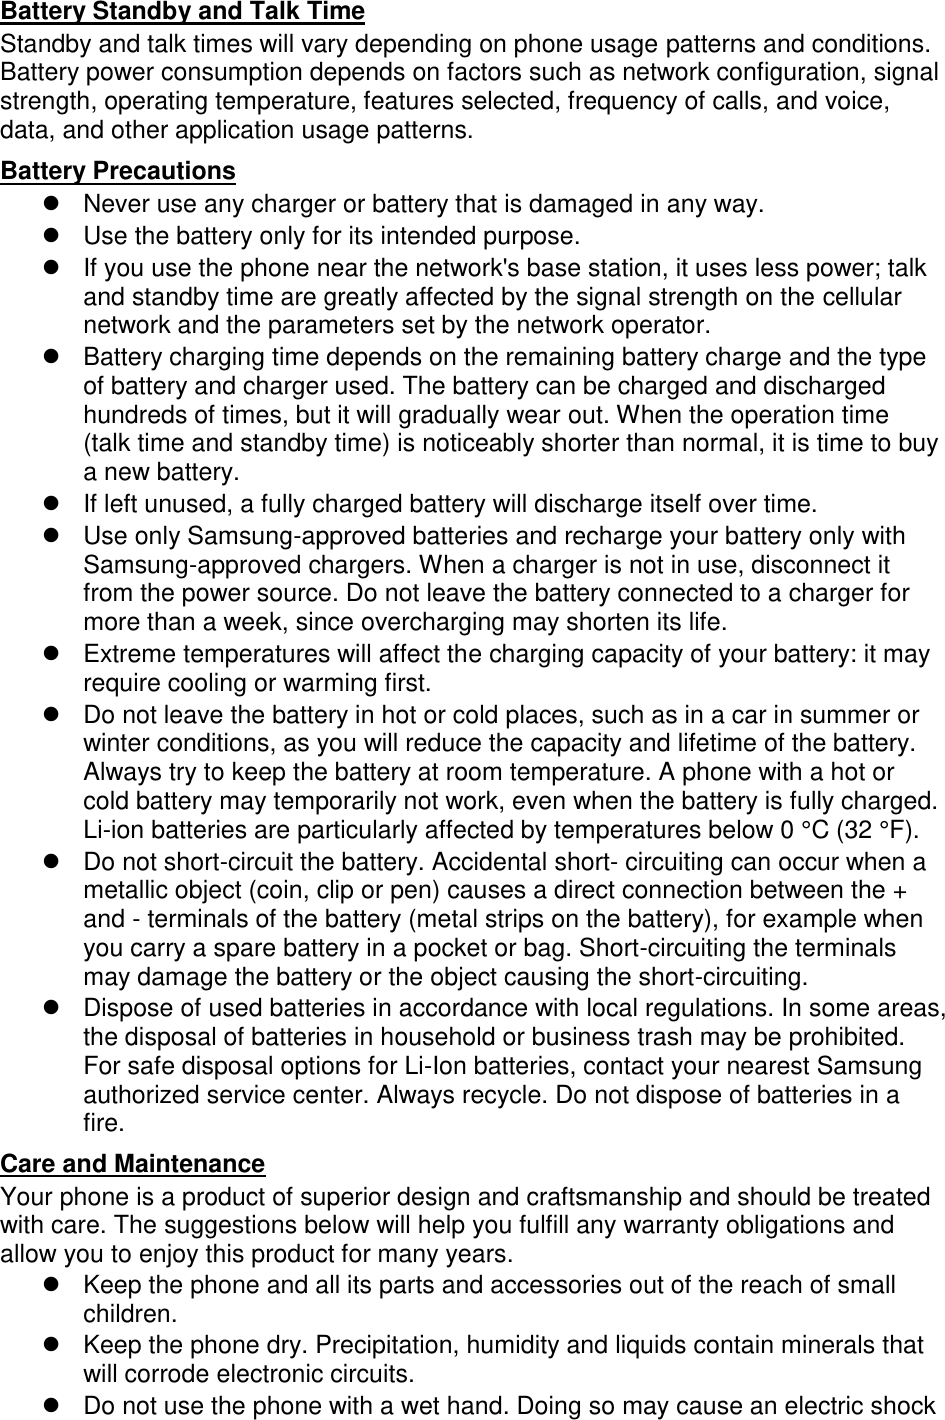 Battery Standby and Talk Time Standby and talk times will vary depending on phone usage patterns and conditions. Battery power consumption depends on factors such as network configuration, signal strength, operating temperature, features selected, frequency of calls, and voice, data, and other application usage patterns.   Battery Precautions Never use any charger or battery that is damaged in any way.Use the battery only for its intended purpose.If you use the phone near the network&apos;s base station, it uses less power; talkand standby time are greatly affected by the signal strength on the cellularnetwork and the parameters set by the network operator.Battery charging time depends on the remaining battery charge and the typeof battery and charger used. The battery can be charged and dischargedhundreds of times, but it will gradually wear out. When the operation time(talk time and standby time) is noticeably shorter than normal, it is time to buya new battery.If left unused, a fully charged battery will discharge itself over time.Use only Samsung-approved batteries and recharge your battery only withSamsung-approved chargers. When a charger is not in use, disconnect itfrom the power source. Do not leave the battery connected to a charger formore than a week, since overcharging may shorten its life.Extreme temperatures will affect the charging capacity of your battery: it mayrequire cooling or warming first.Do not leave the battery in hot or cold places, such as in a car in summer orwinter conditions, as you will reduce the capacity and lifetime of the battery.Always try to keep the battery at room temperature. A phone with a hot orcold battery may temporarily not work, even when the battery is fully charged.Li-ion batteries are particularly affected by temperatures below 0 °C (32 °F).Do not short-circuit the battery. Accidental short- circuiting can occur when ametallic object (coin, clip or pen) causes a direct connection between the +and - terminals of the battery (metal strips on the battery), for example whenyou carry a spare battery in a pocket or bag. Short-circuiting the terminalsmay damage the battery or the object causing the short-circuiting.Dispose of used batteries in accordance with local regulations. In some areas,the disposal of batteries in household or business trash may be prohibited.For safe disposal options for Li-Ion batteries, contact your nearest Samsungauthorized service center. Always recycle. Do not dispose of batteries in afire.Care and Maintenance Your phone is a product of superior design and craftsmanship and should be treated with care. The suggestions below will help you fulfill any warranty obligations and allow you to enjoy this product for many years. Keep the phone and all its parts and accessories out of the reach of smallchildren.Keep the phone dry. Precipitation, humidity and liquids contain minerals thatwill corrode electronic circuits.Do not use the phone with a wet hand. Doing so may cause an electric shock